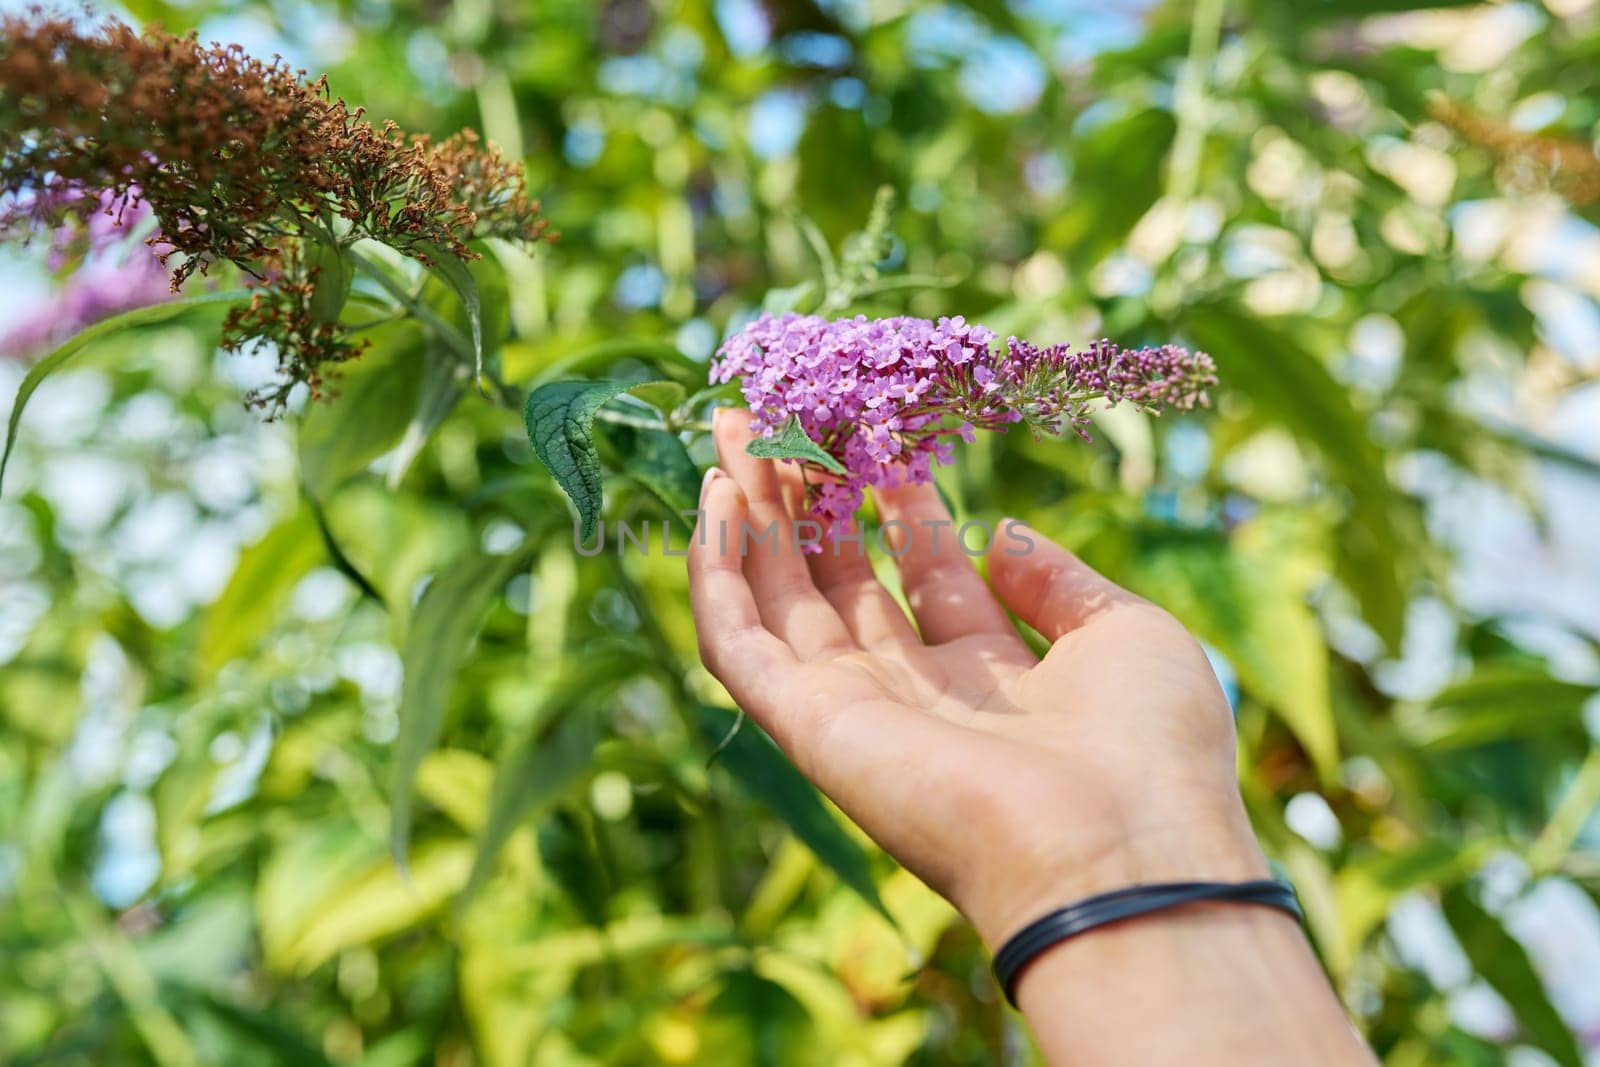 Flowering Buddleia bush, branch with pink purple flowers close-up. Nature, botany, gardening, landscaping, summer concept